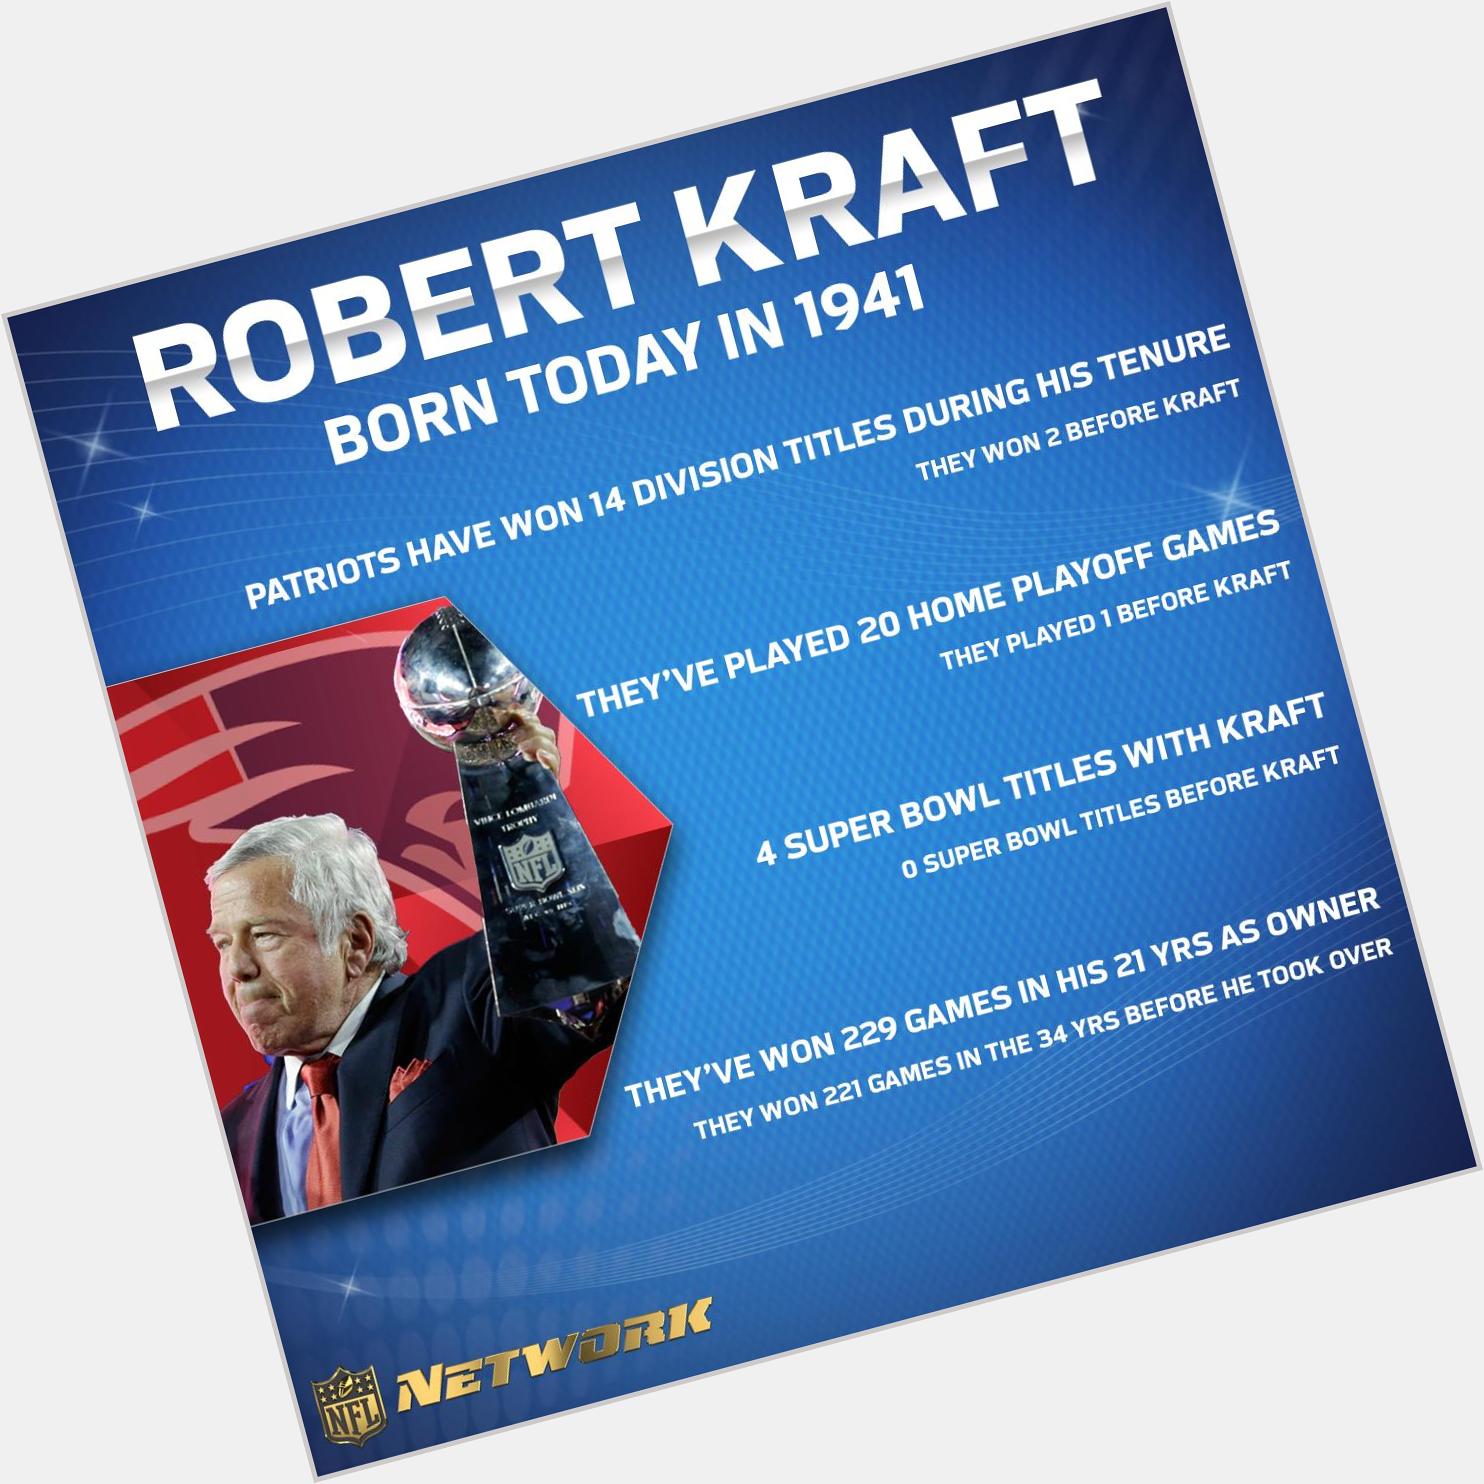 Happy birthday Robert Kraft!
 
Since buying the in 1994, their .682 win percentage is the best in the NFL. 